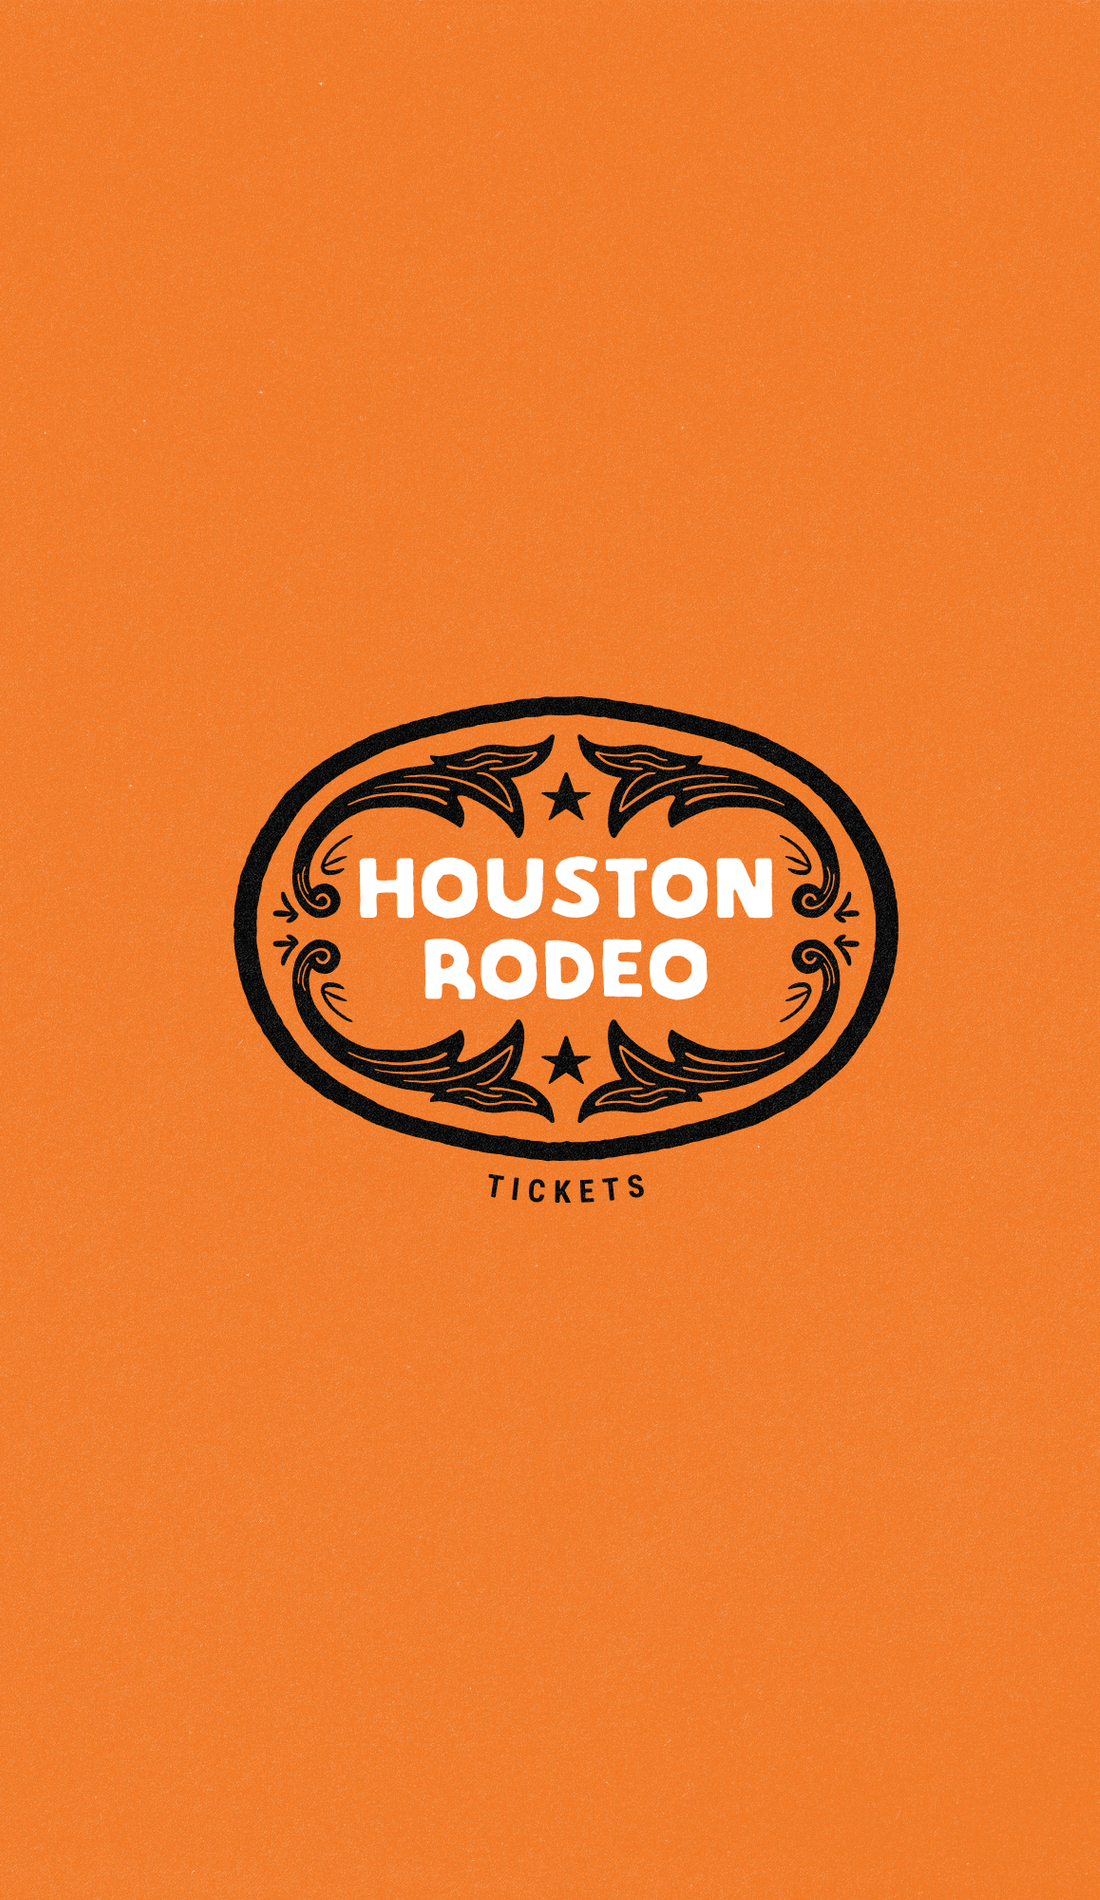 A Houston Rodeo live event